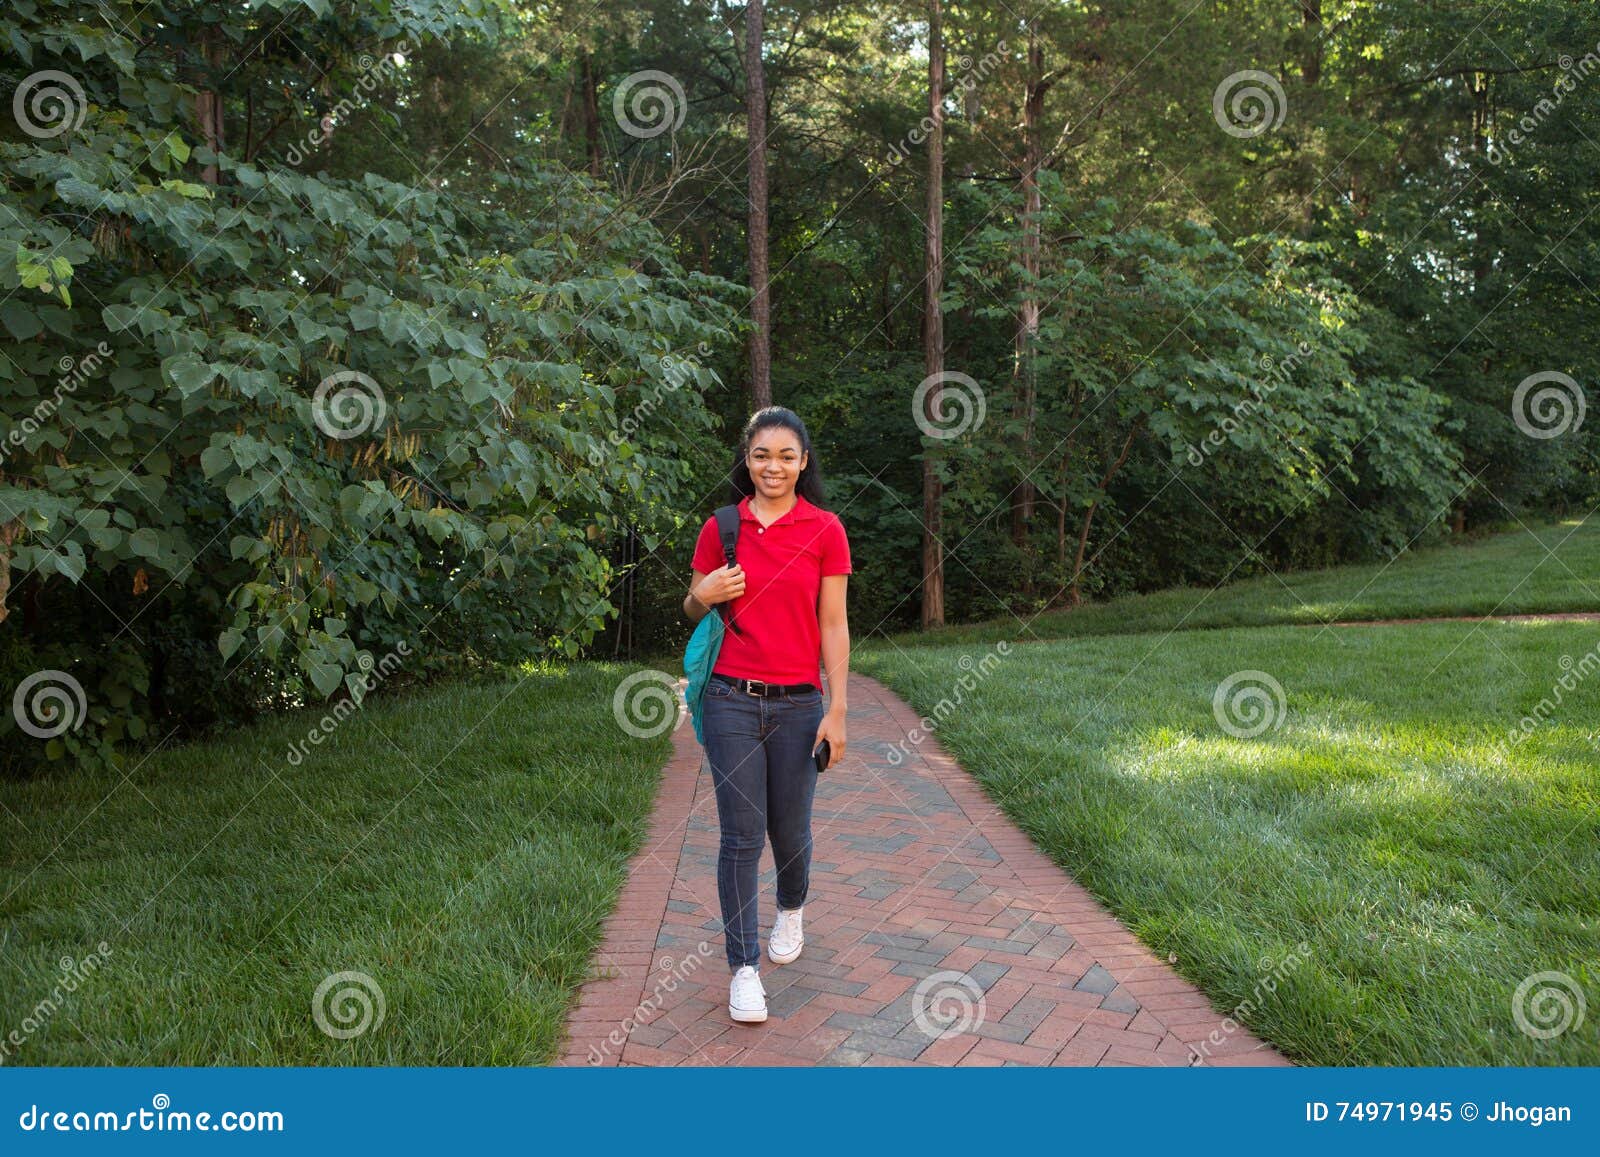 College Student With A Backpack Stock Image - Image of girl, lifestyle